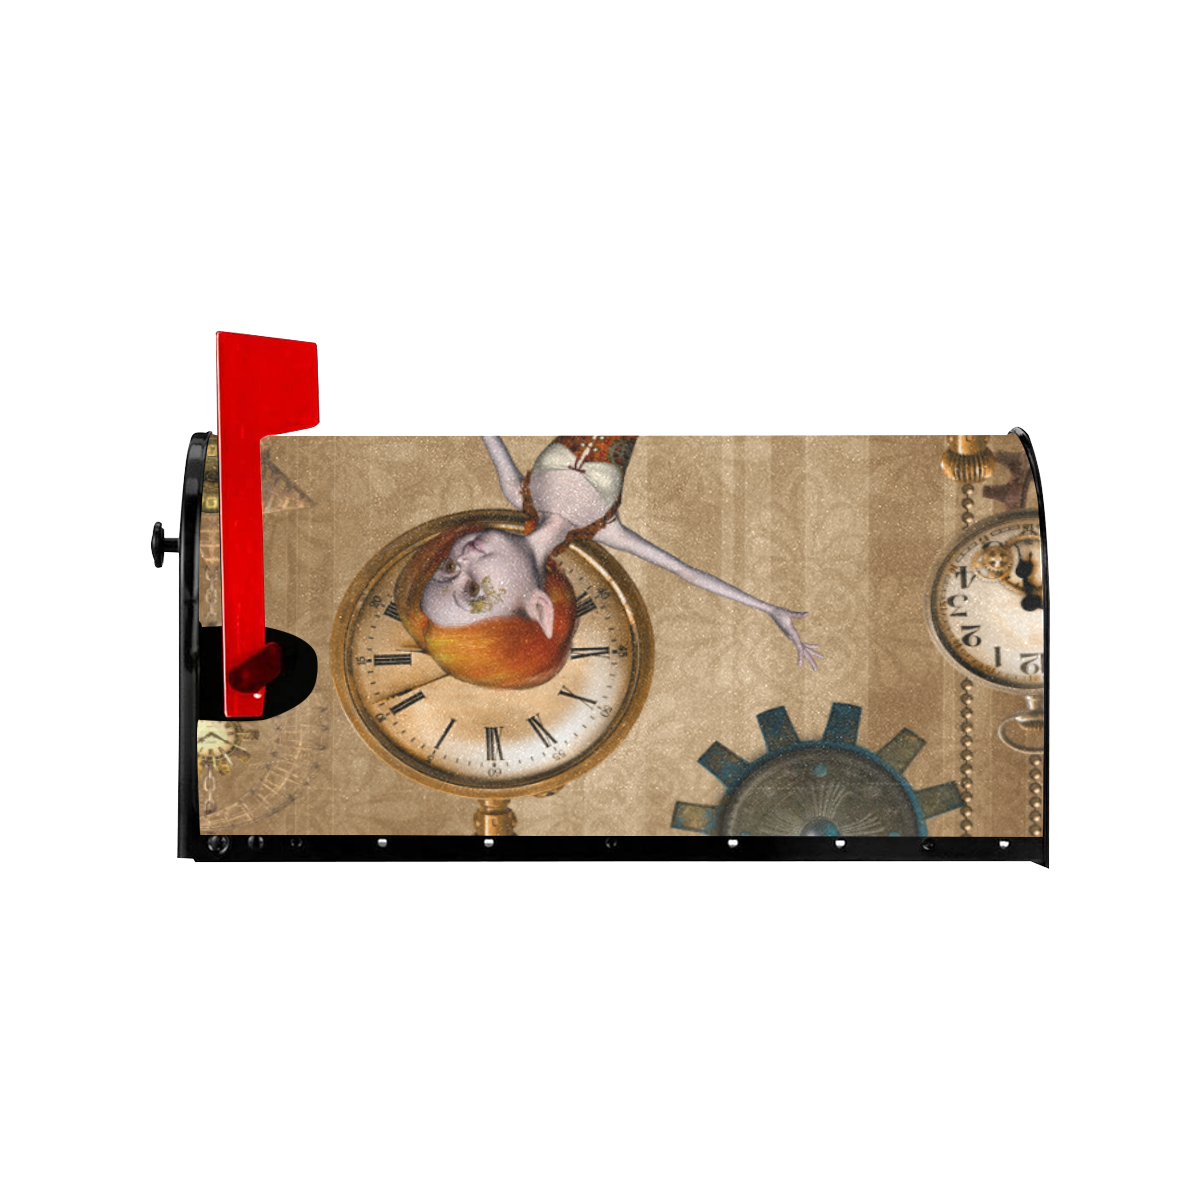 Steampunk girl, clocks and gears Mailbox Cover